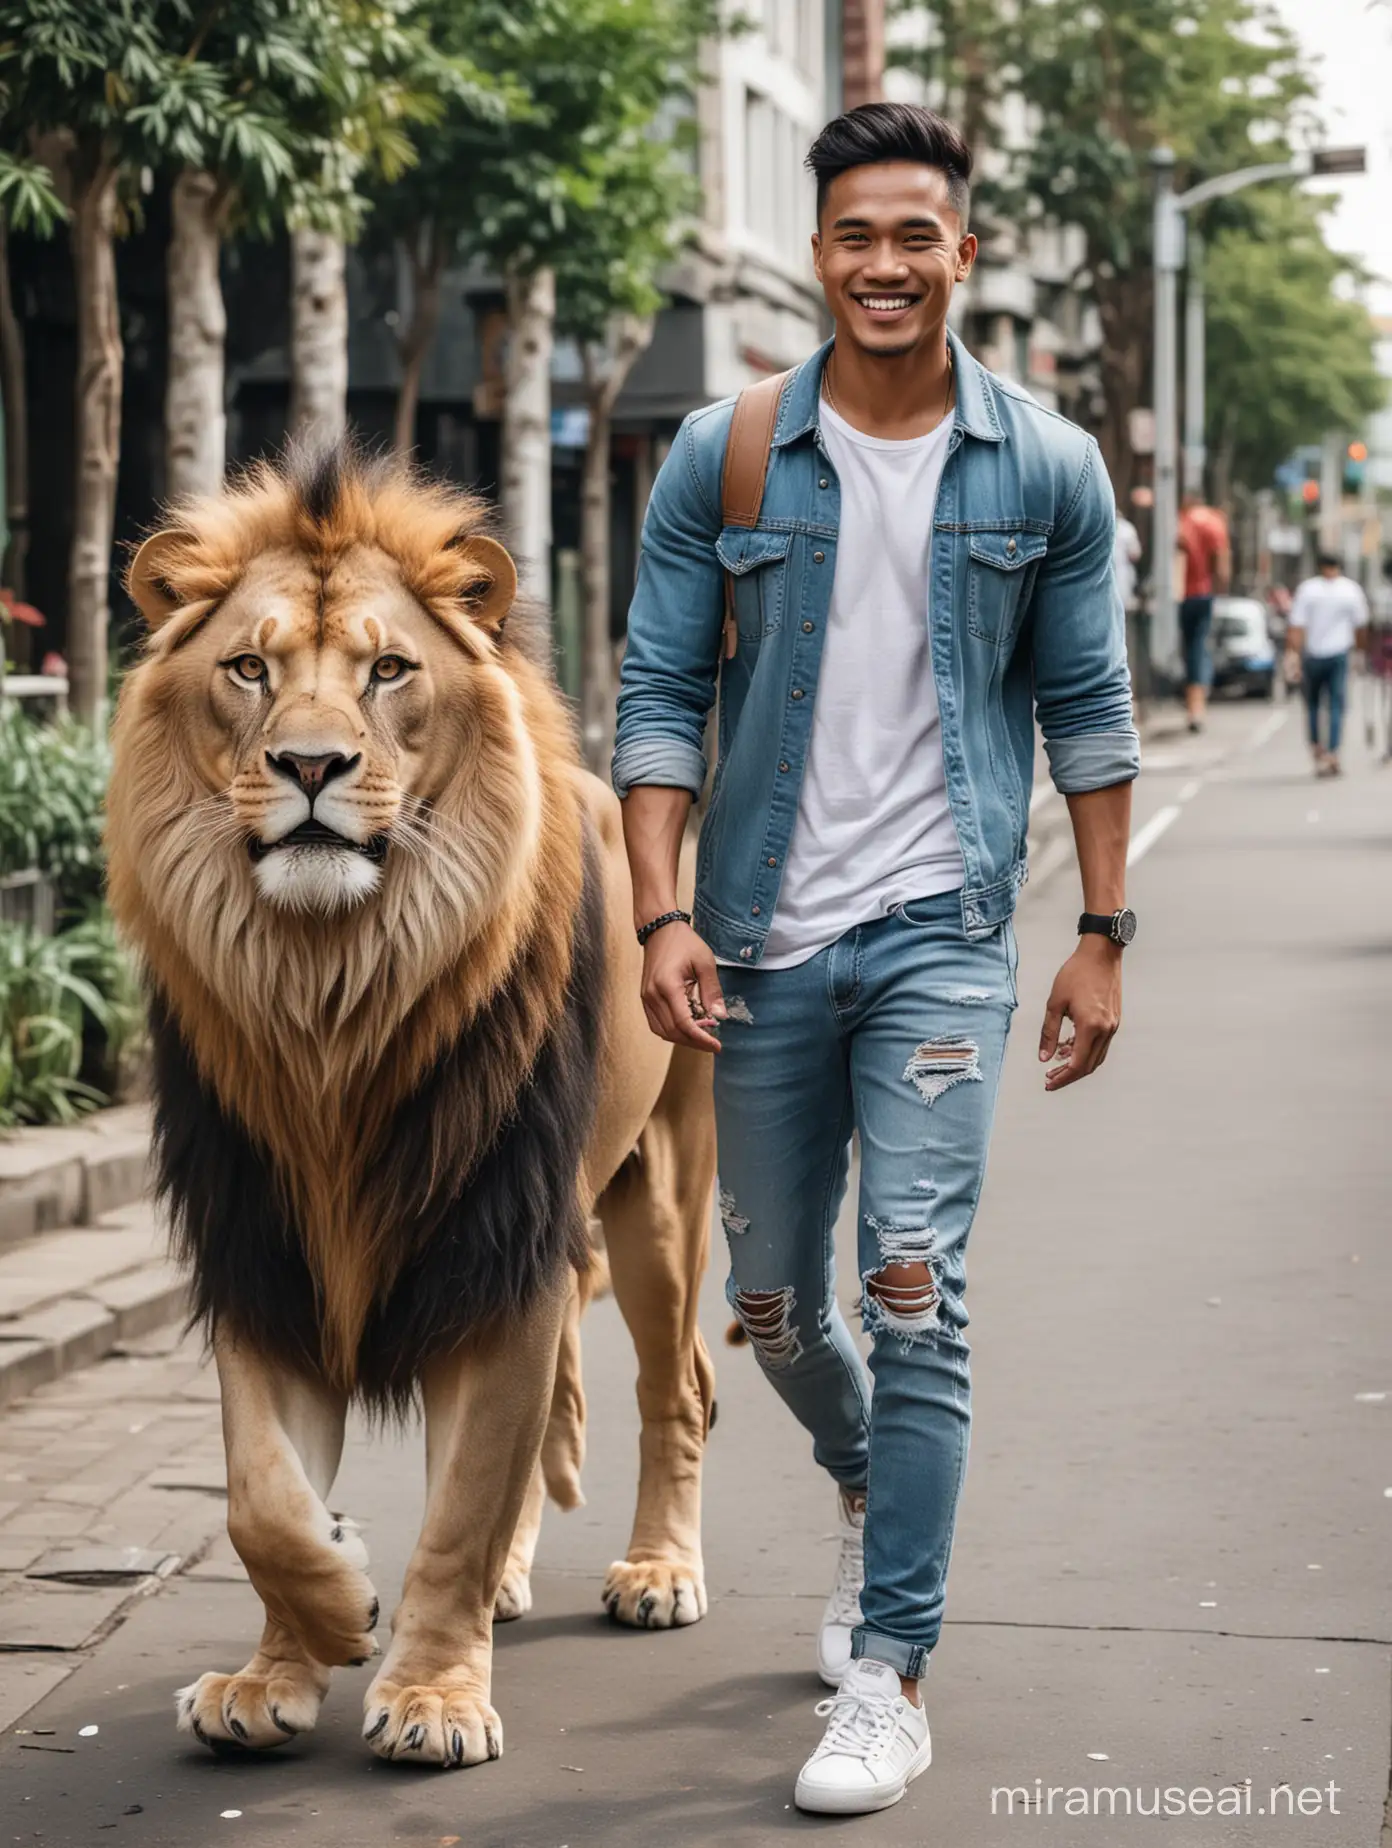 Trendy Indonesian Man Walking with Lion in Urban Setting